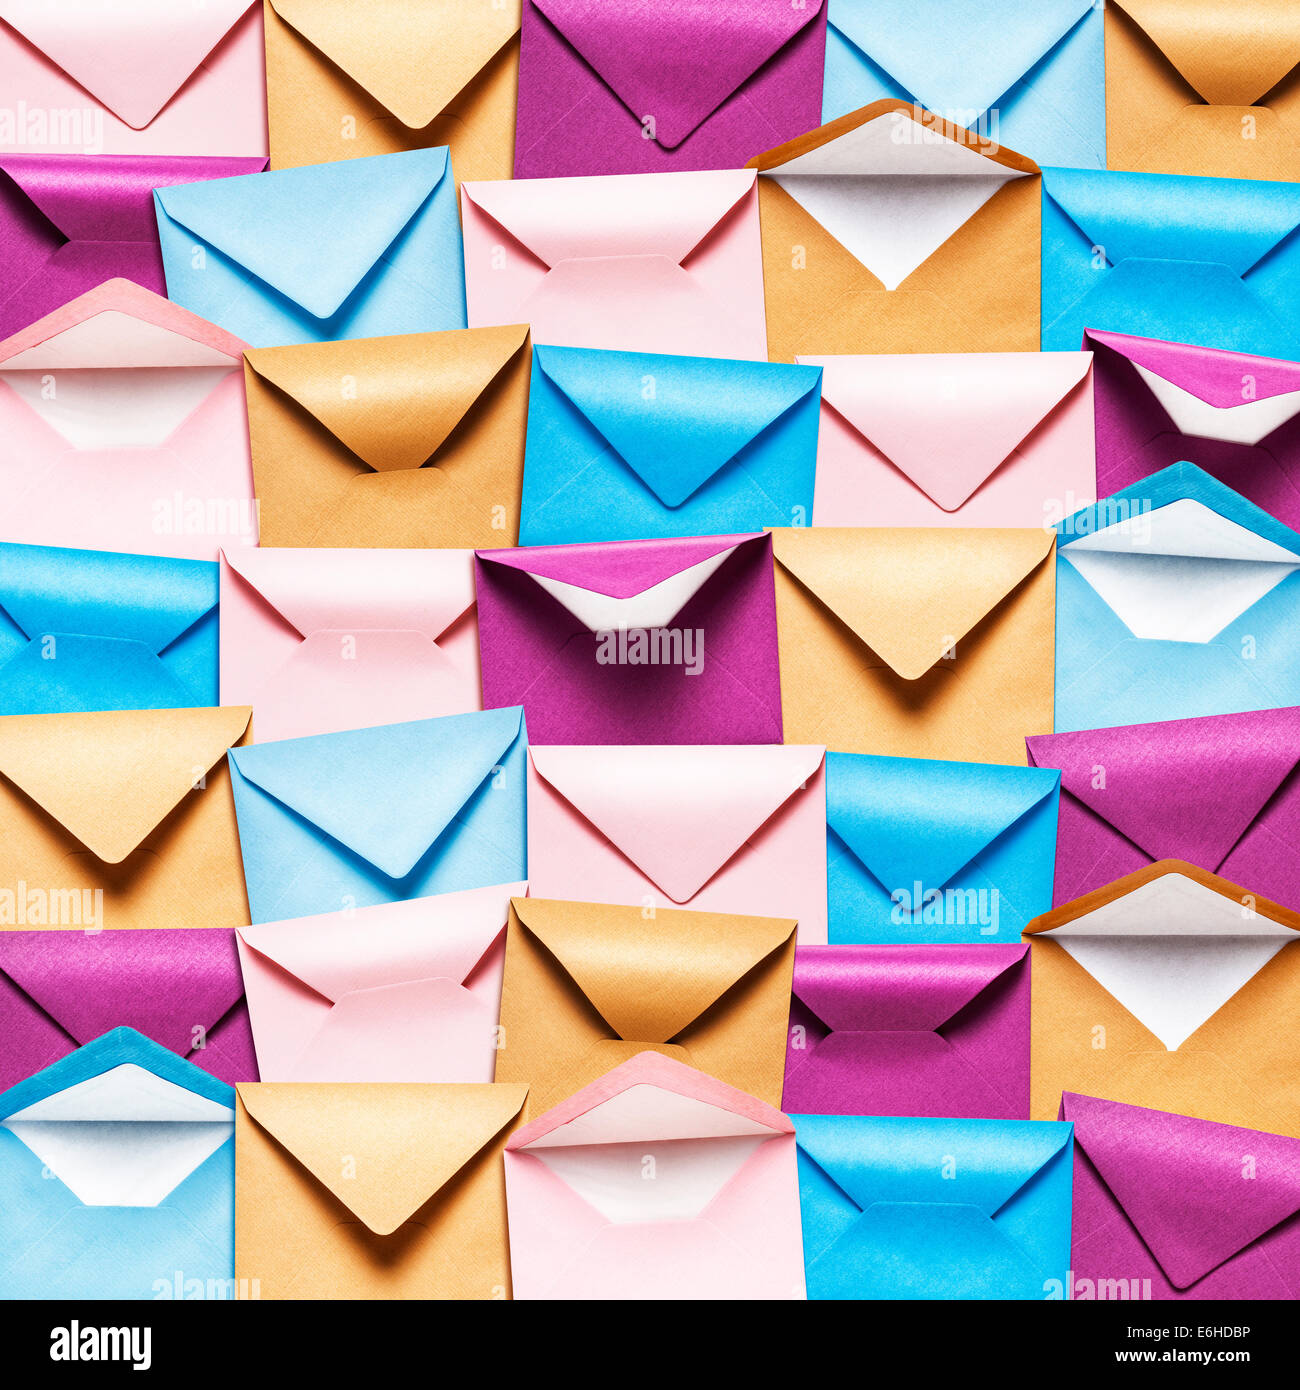 Background with rows of colorful envelopes, Pink, blue and brown envelope collection. Stock Photo